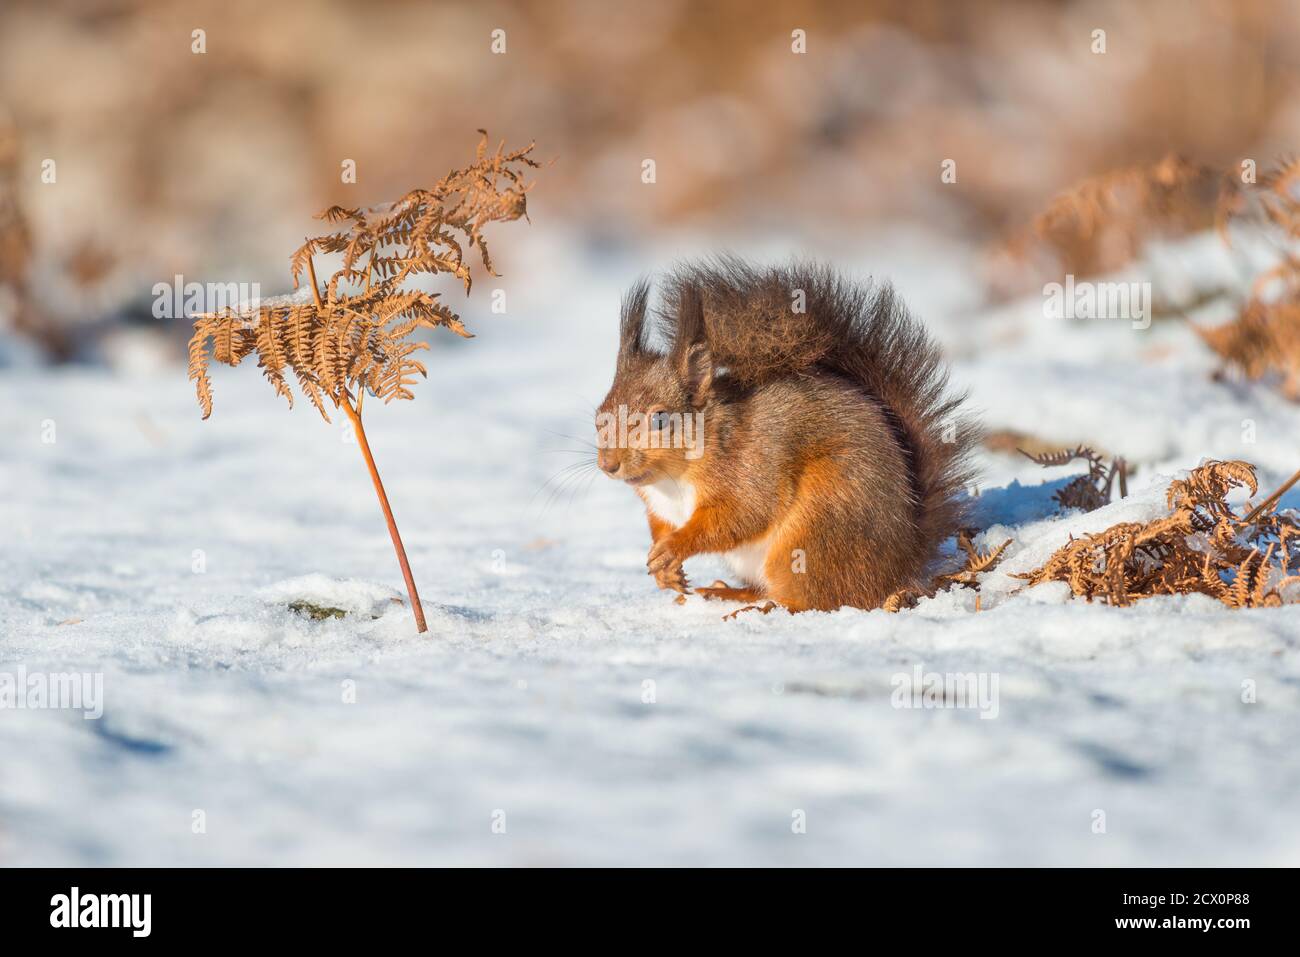 Eurasian Red Squirrel feeding & playing on the snow covered ground, protected from the cold weather with its winter coat & tail Stock Photo